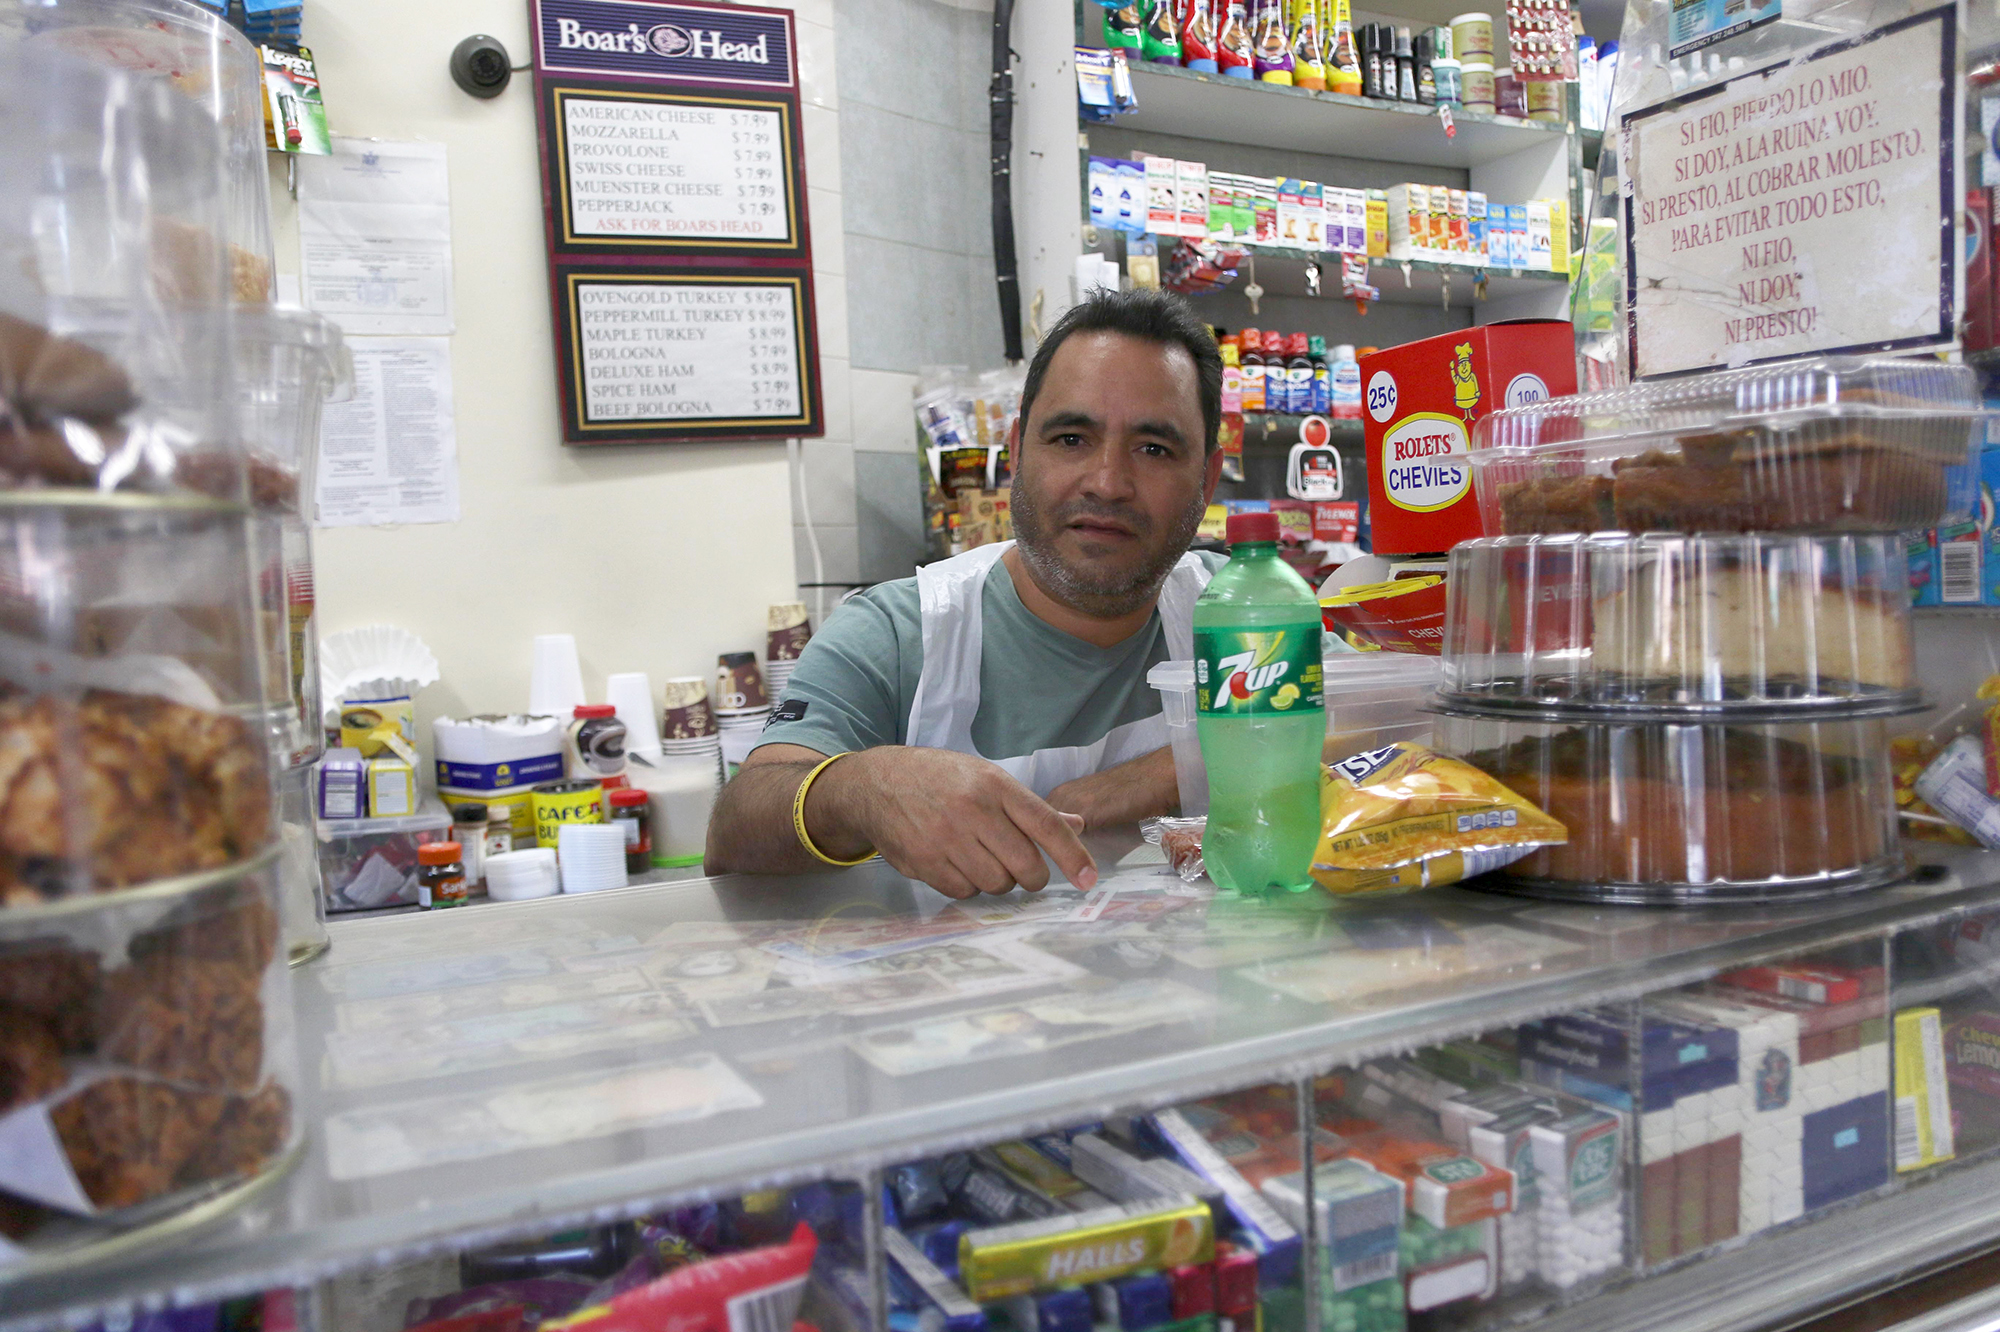 Bolivar Mena manages the Mini Market in Queens frequented by writer Angely Mercado. He always greets his customers and does his best to manage morning and afternoon rushes.